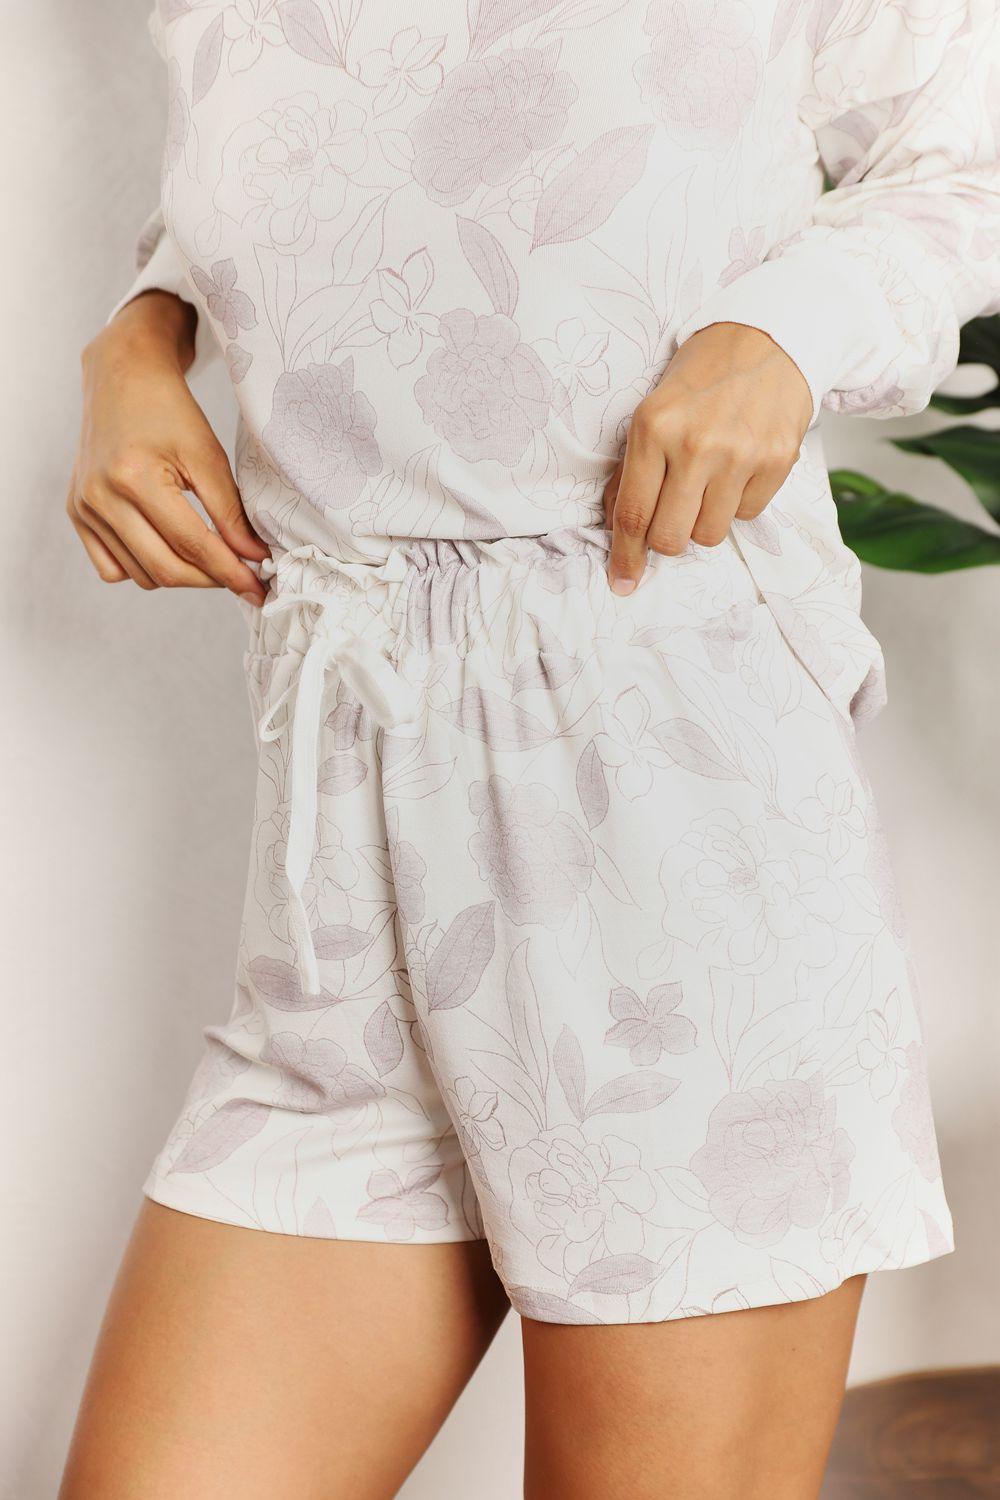 Double Take Floral Long Sleeve Top and Shorts Loungewear Set - Immenzive